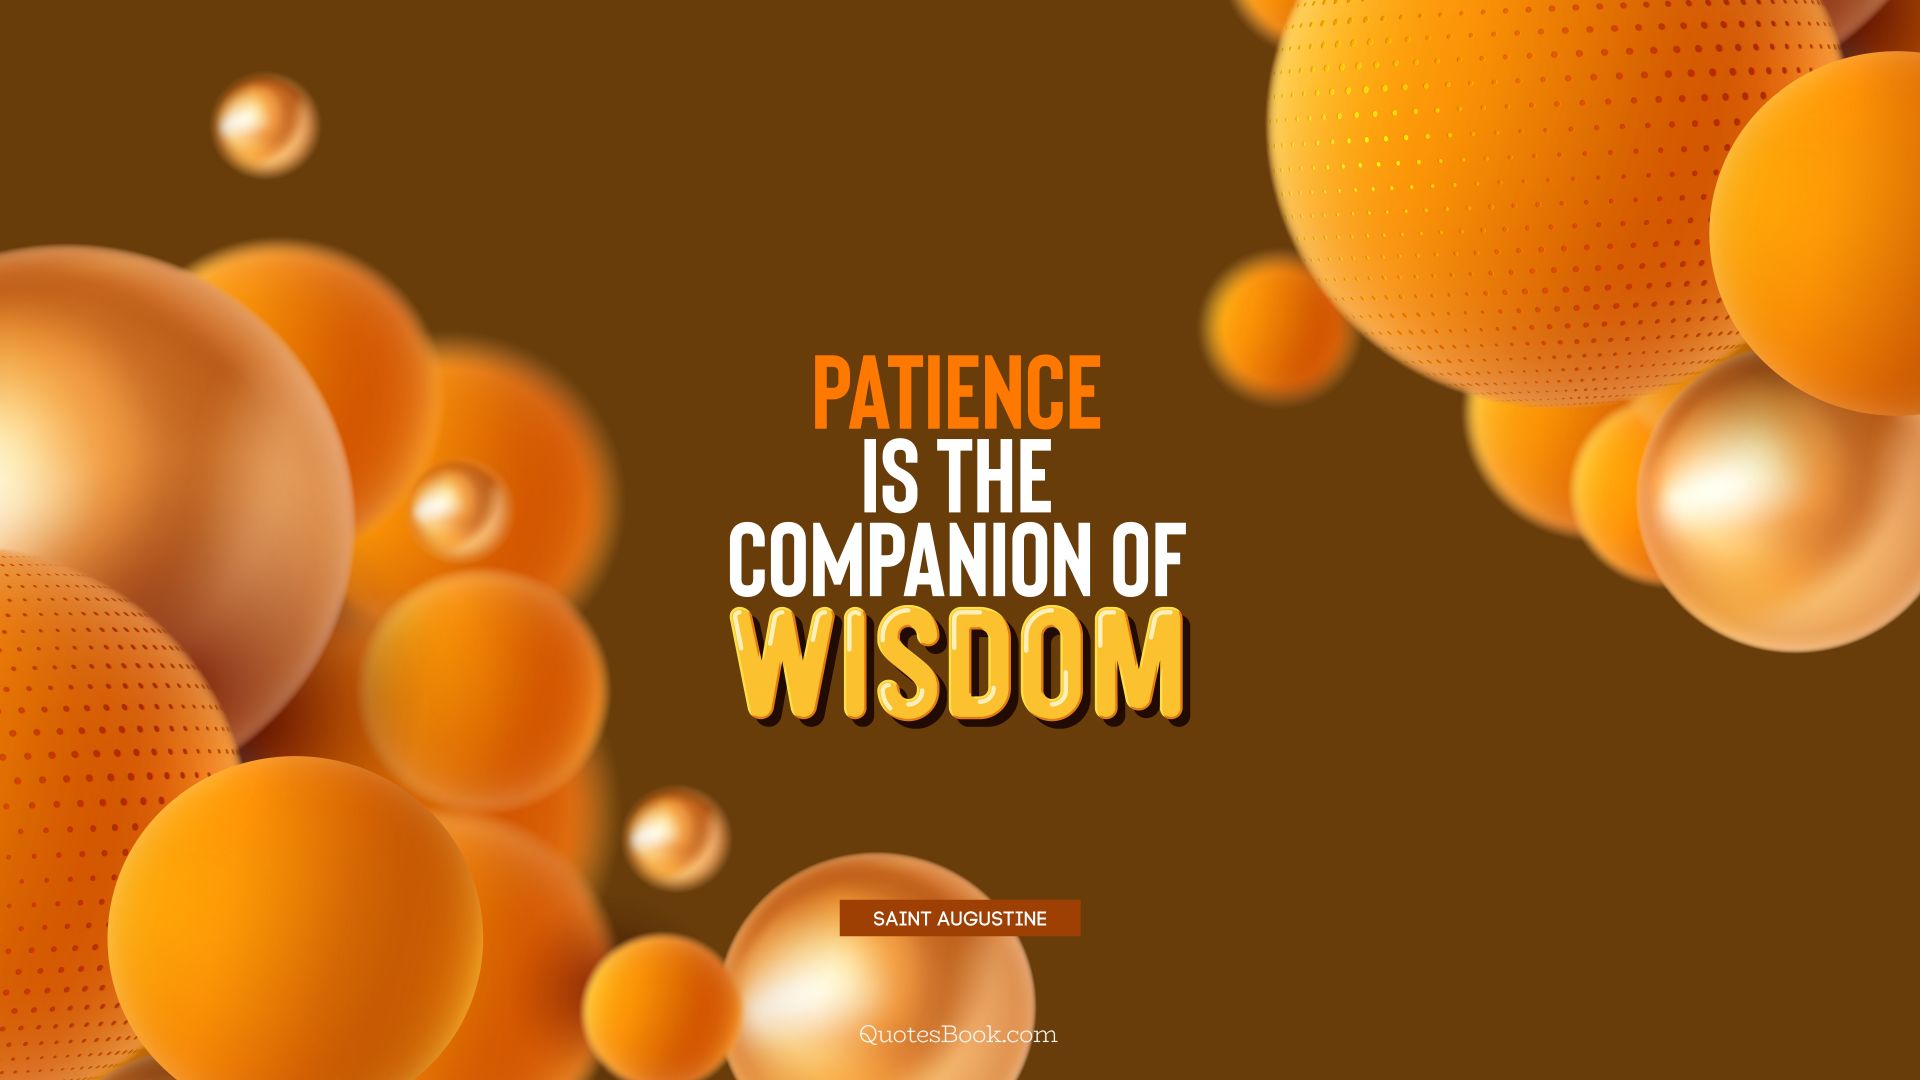 Patience is the companion of wisdom. - Quote by Saint Augustine